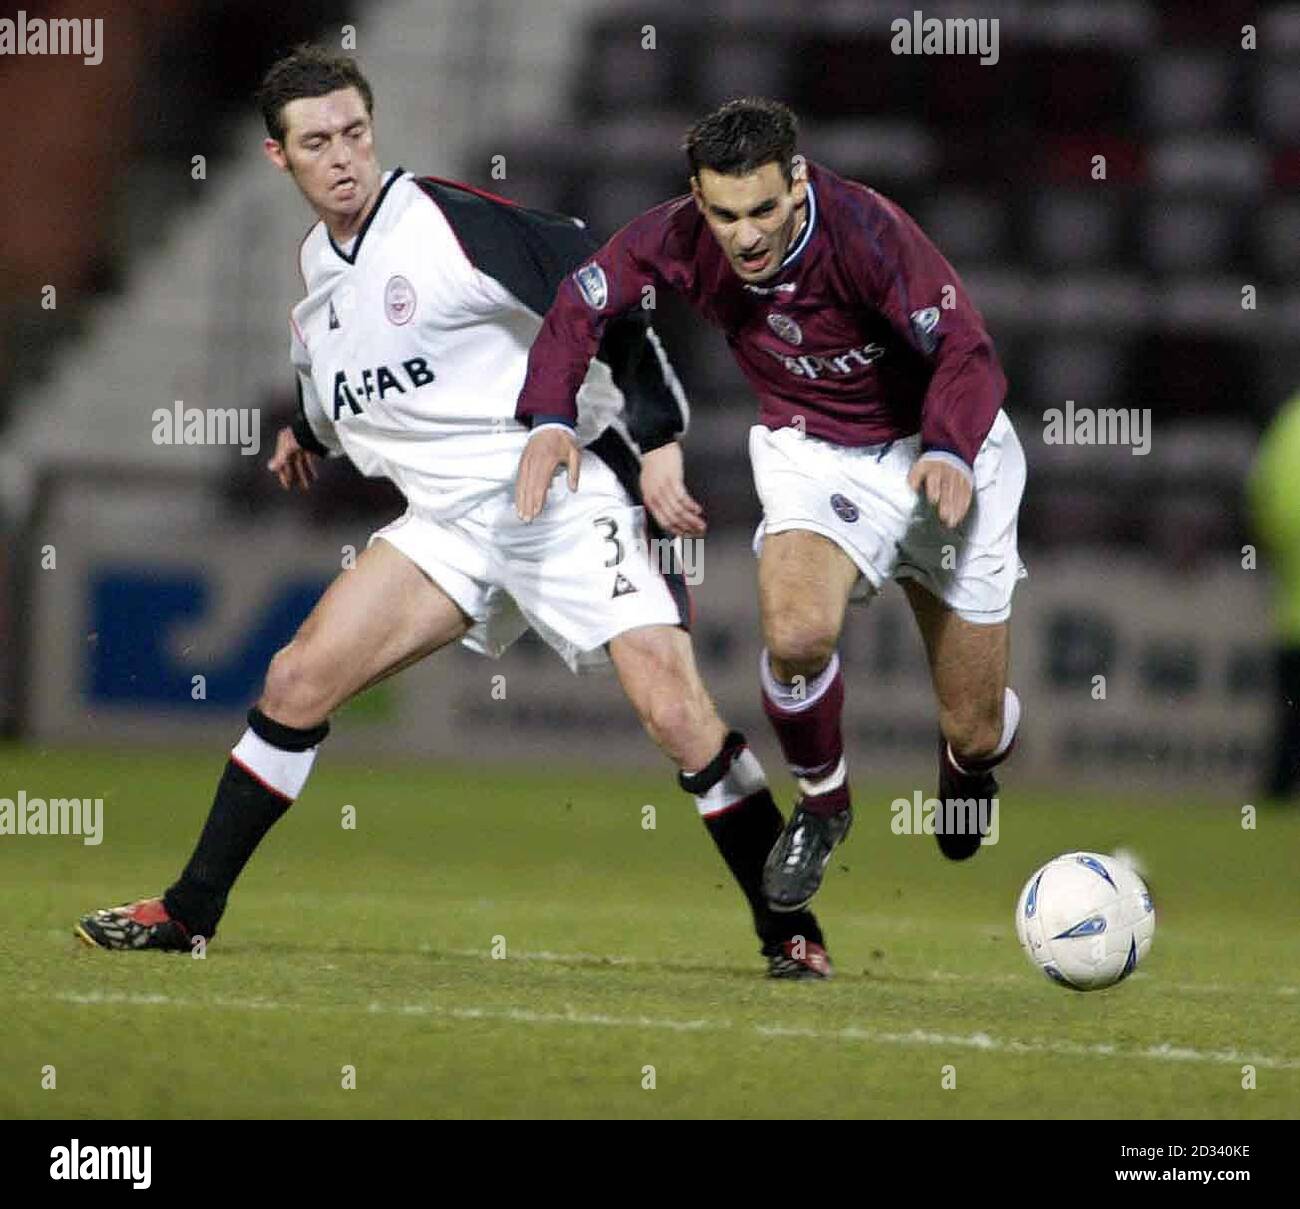 Aberdeen's Jamie McAllister and Hearts' Jean Louis Valois battle for the ball during their Bank of Scotland Scottish Premier League match at Hearts' Tynecastle Park ground in Edinburgh. Stock Photo